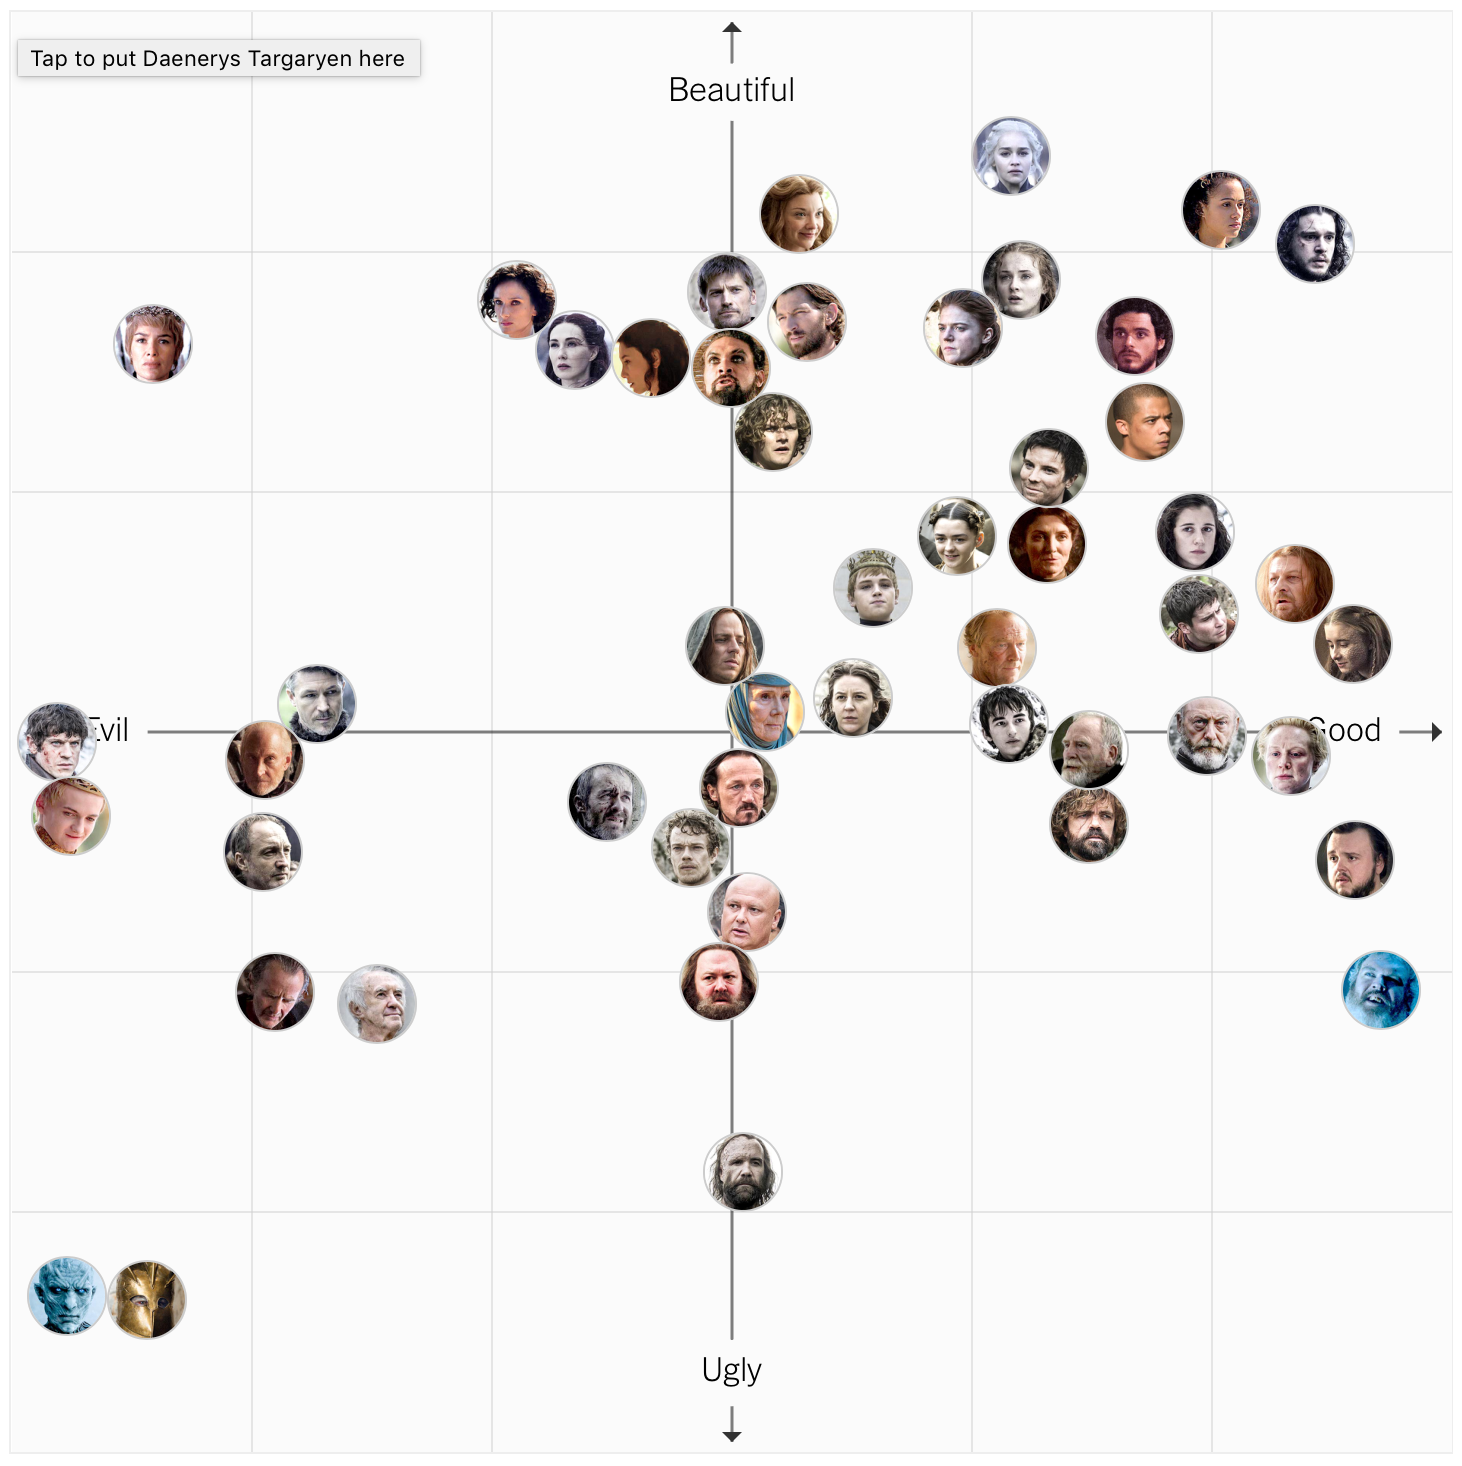 Game of Thrones character chart, you decide FlowingData